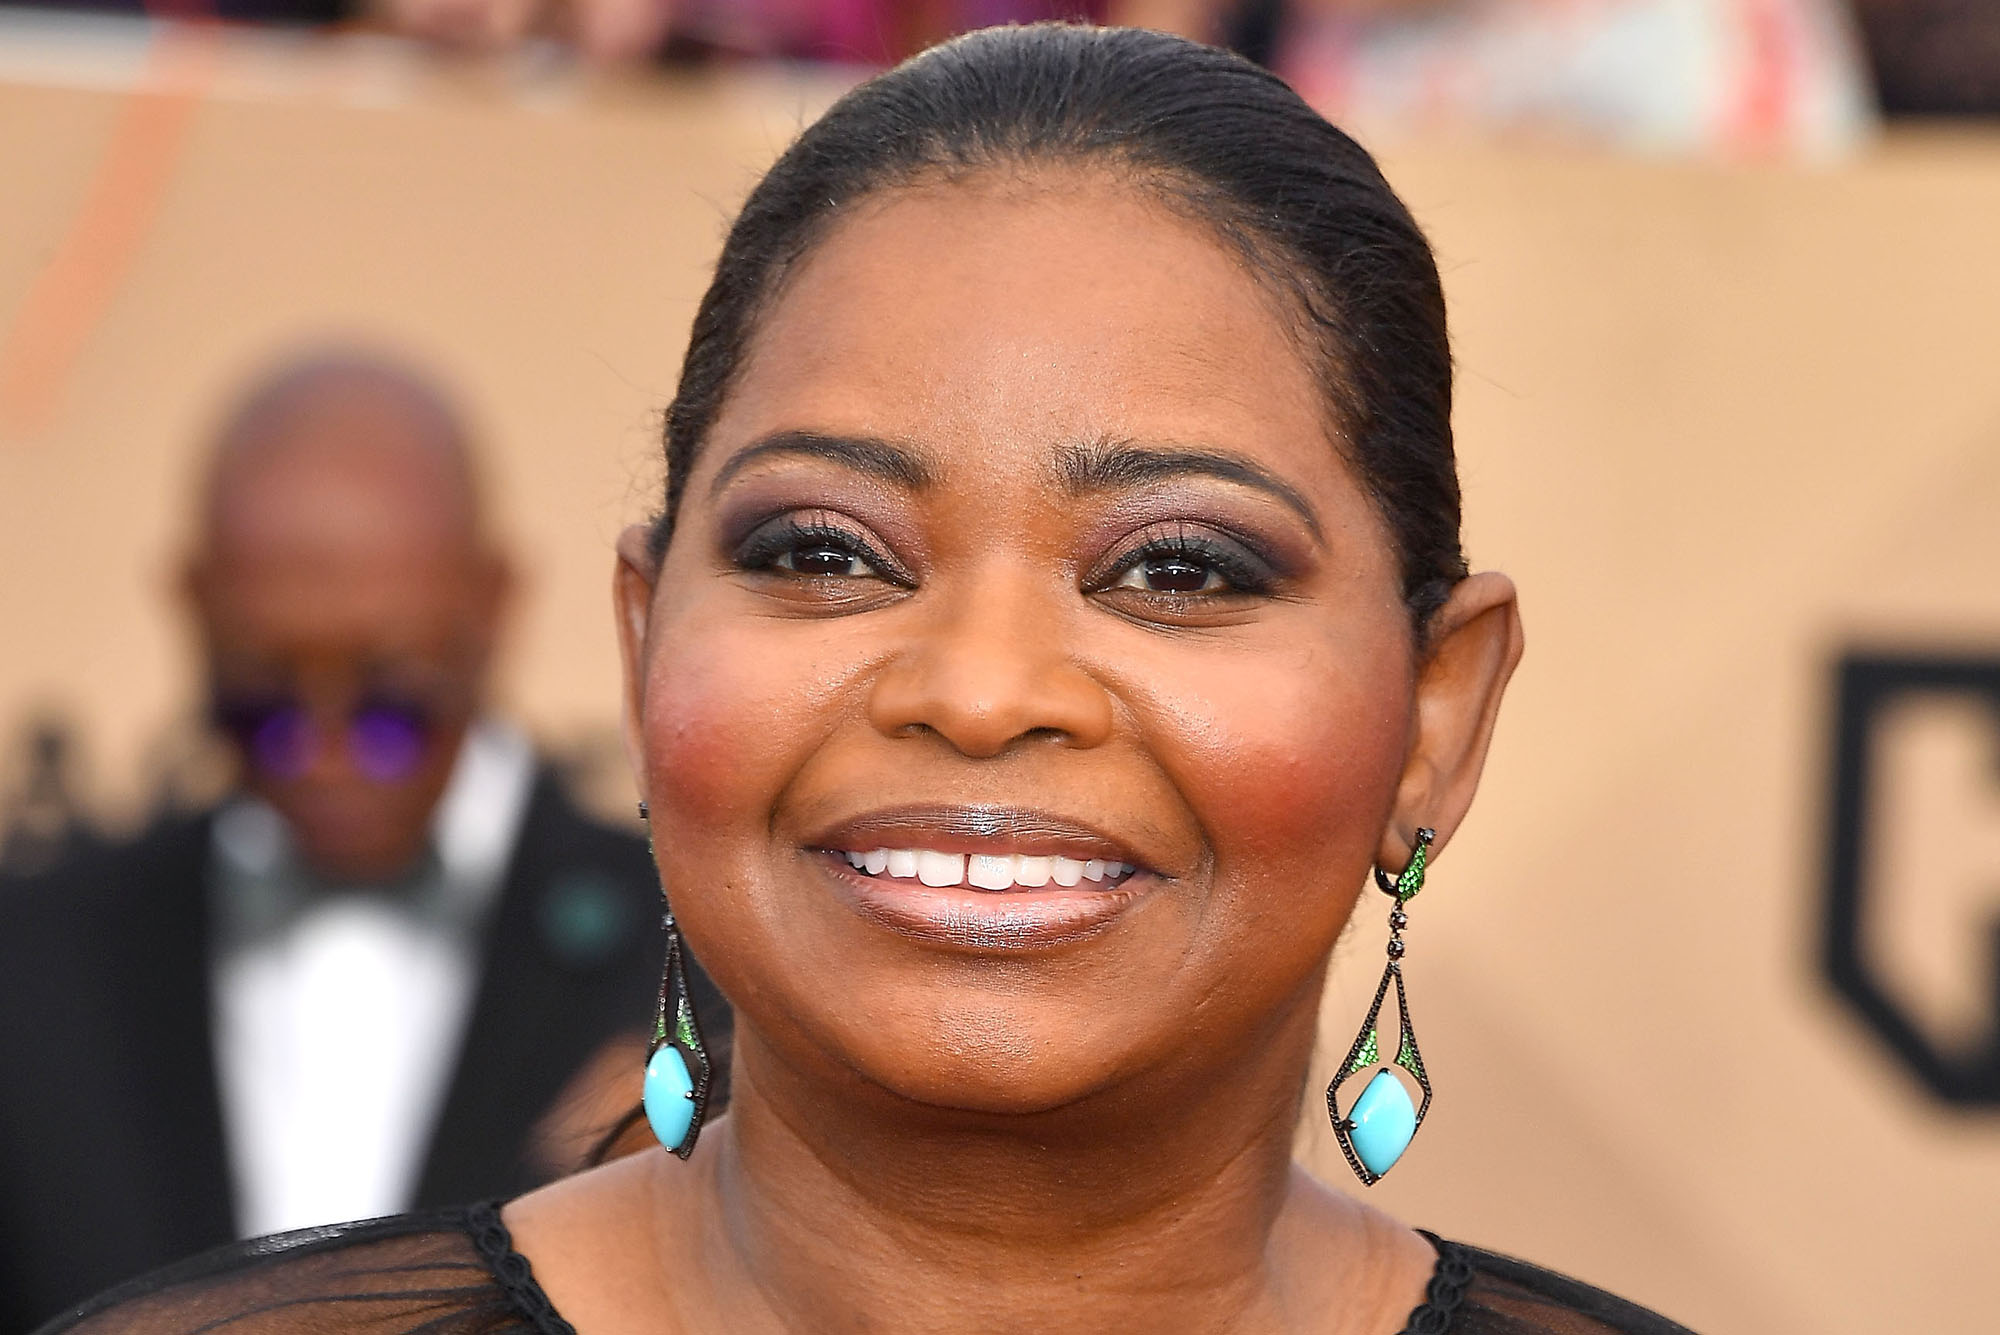 Octavia Spencer arrives at the 23rd Annual Screen Actors Guild Awards at The Shrine Expo Hall on January 29, 2017 in Los Angeles, California. (Steve Granitz&mdash;WireImage)